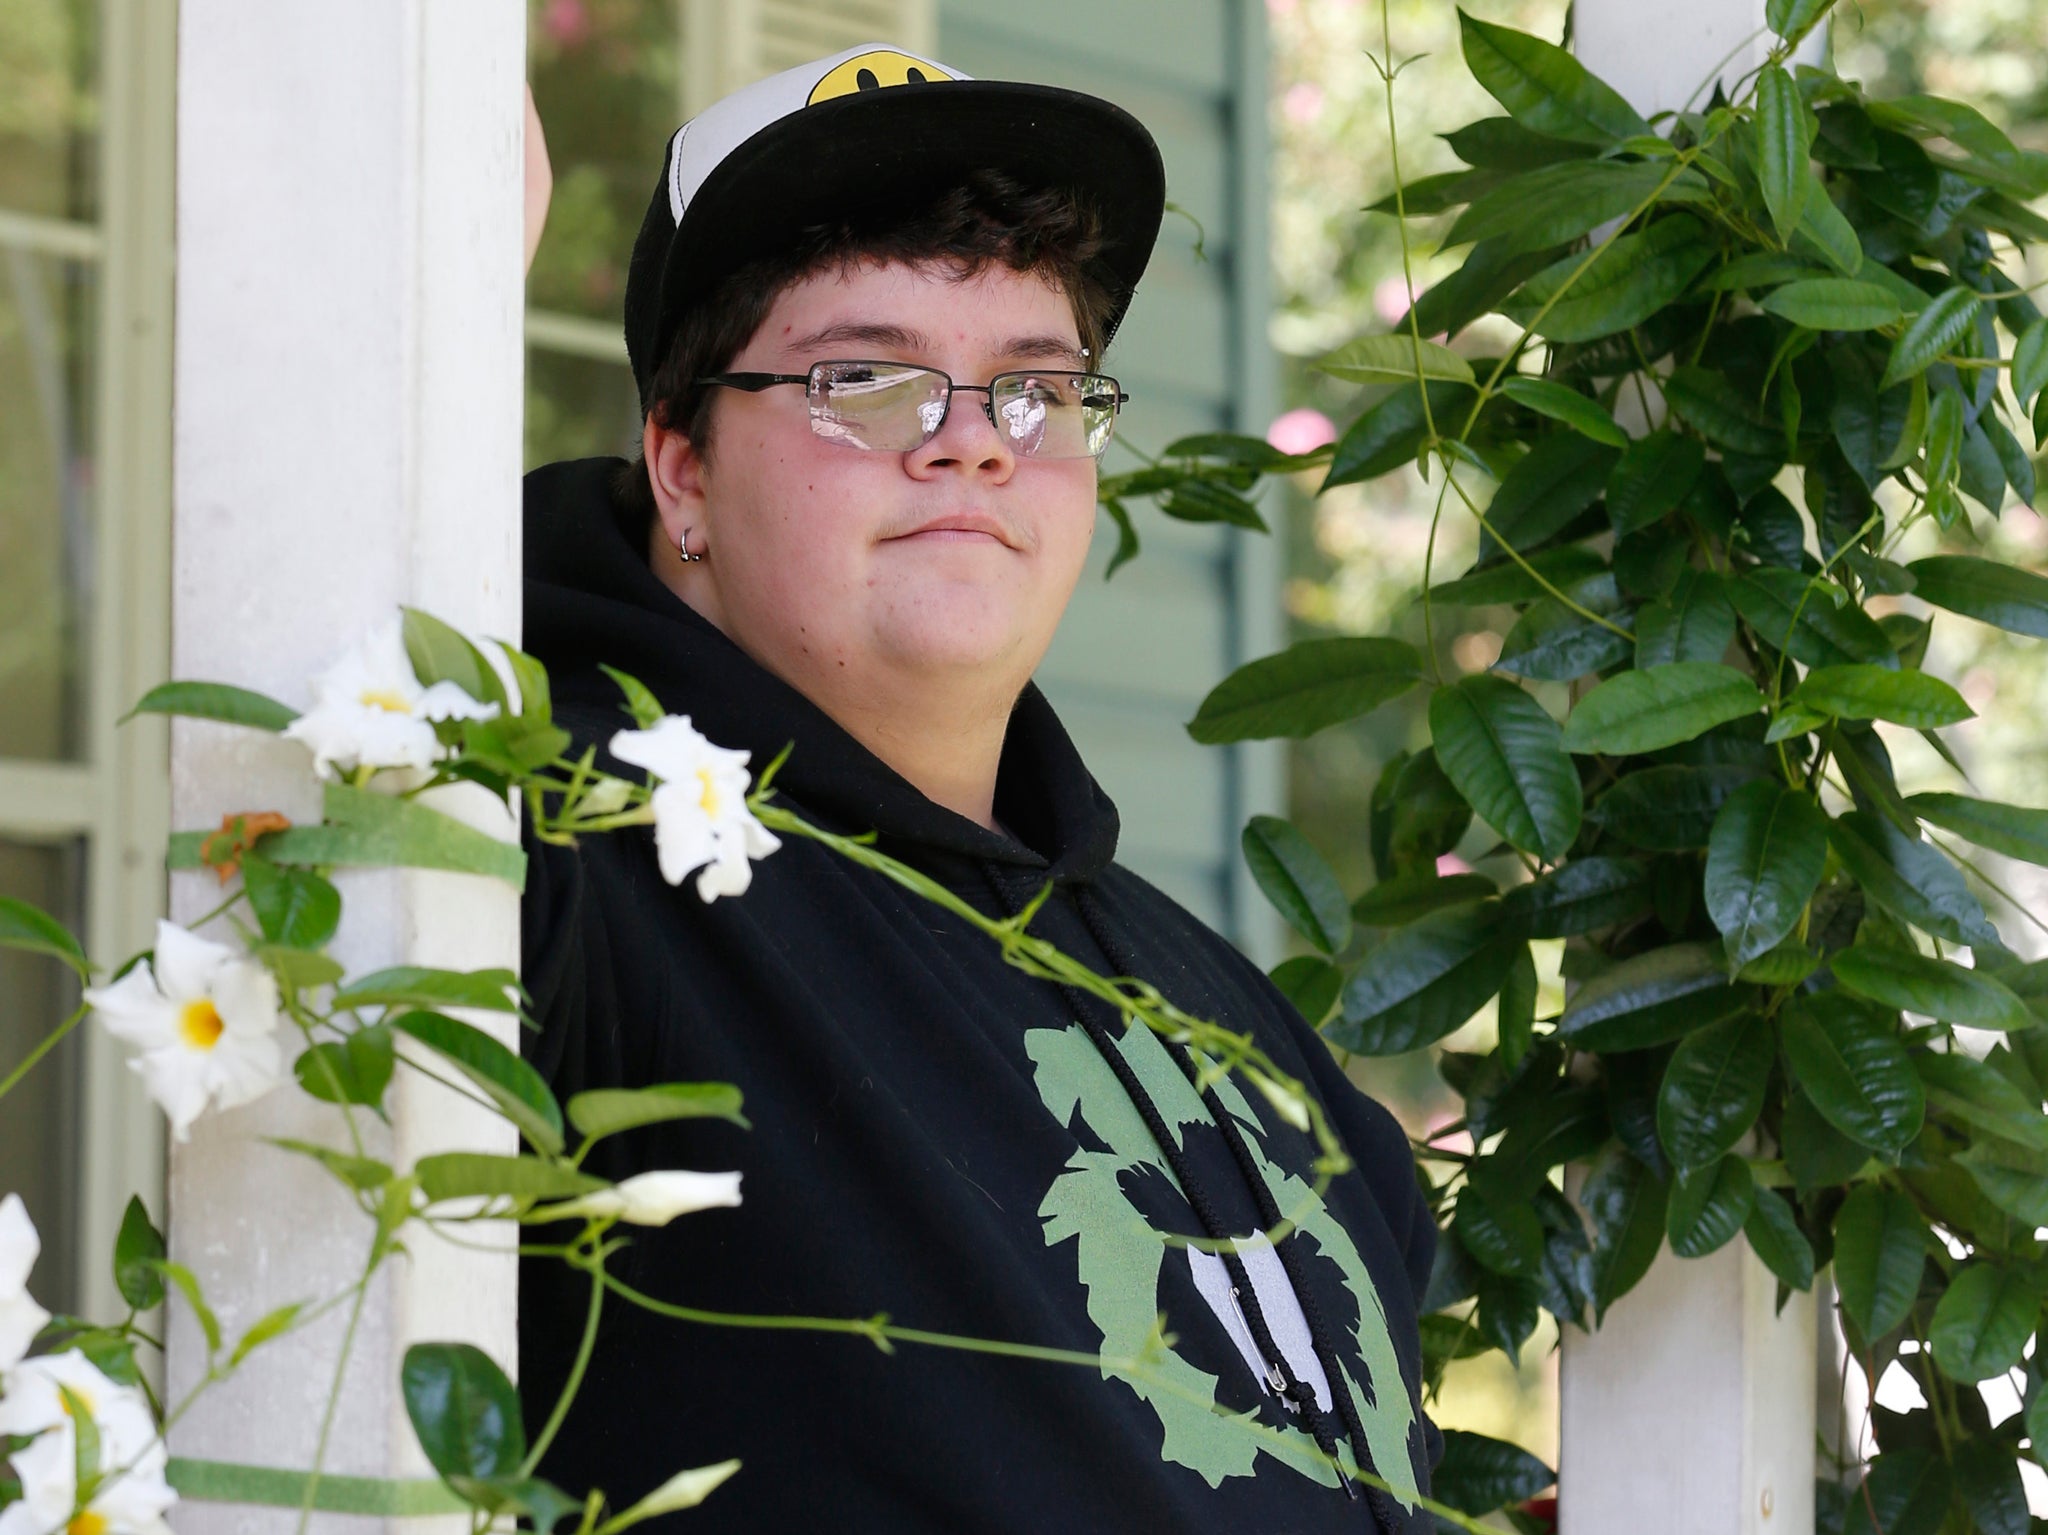 Gavin Grimm, 16, on the front porch of his Gloucester, Virginia, home AP